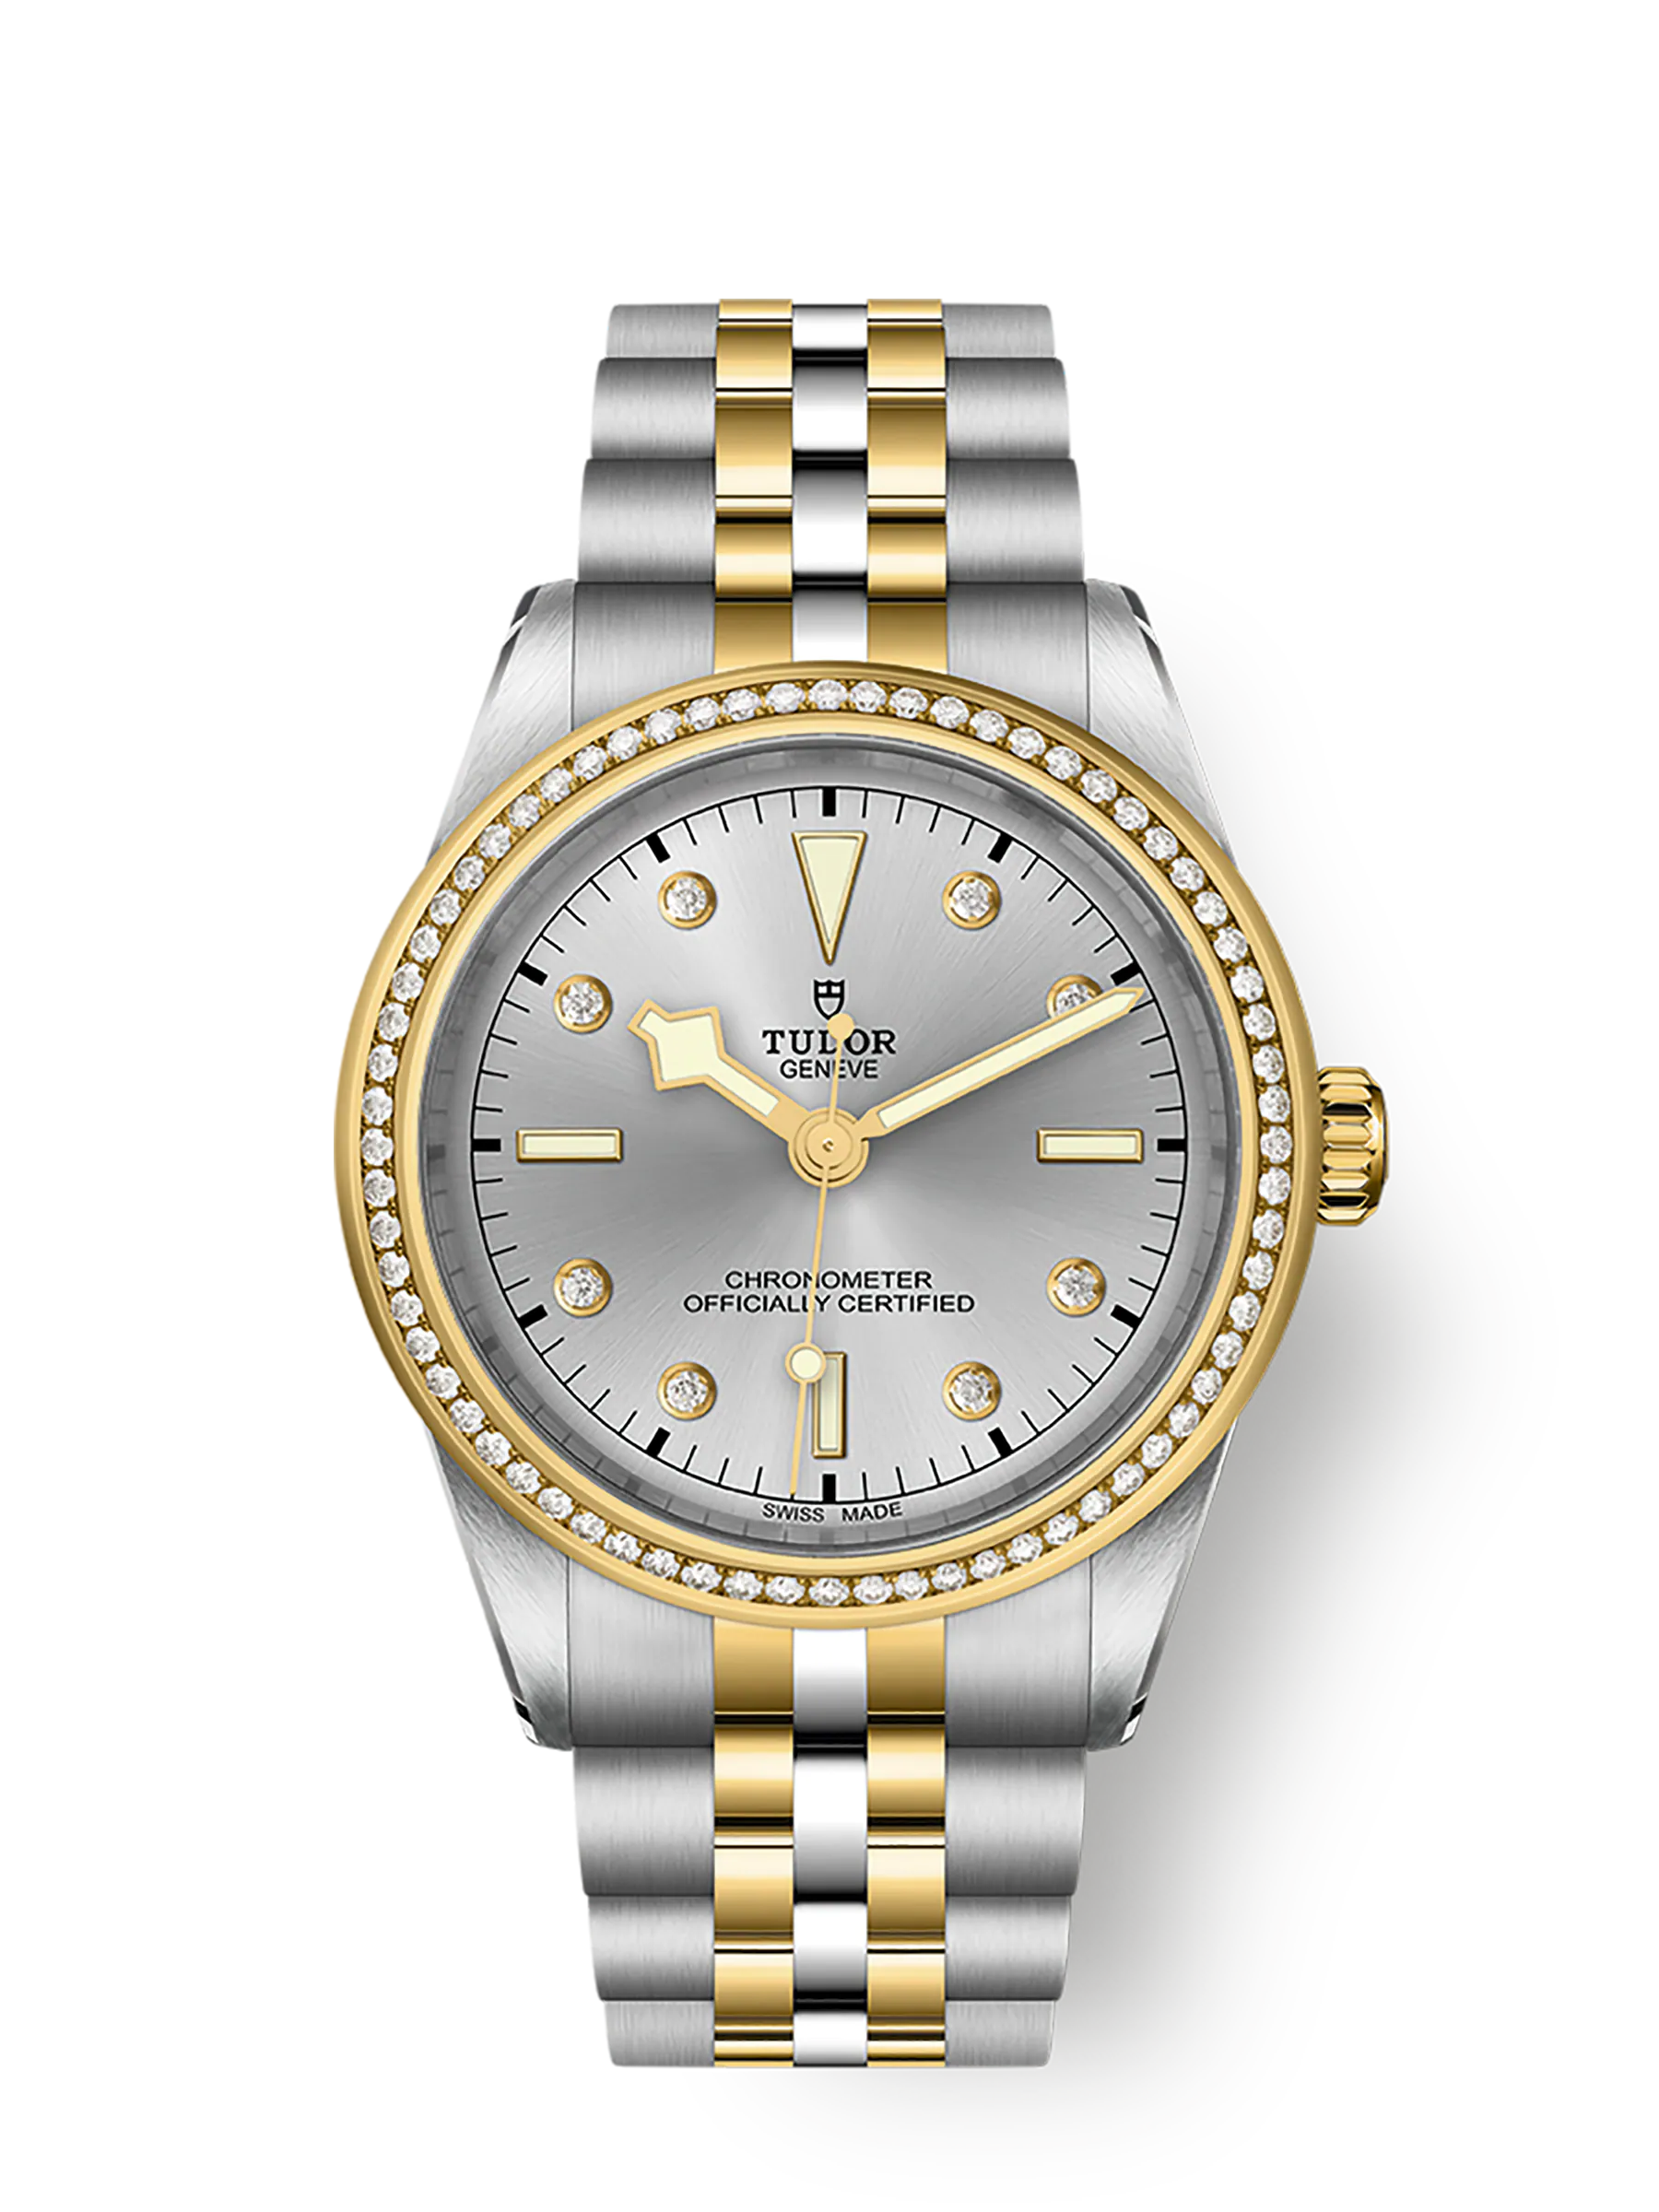 Tudor Black Bay 39 S&G, 316L Stainless Steel, 18k Yellow Gold and Diamonds, Ref# M79673-0006